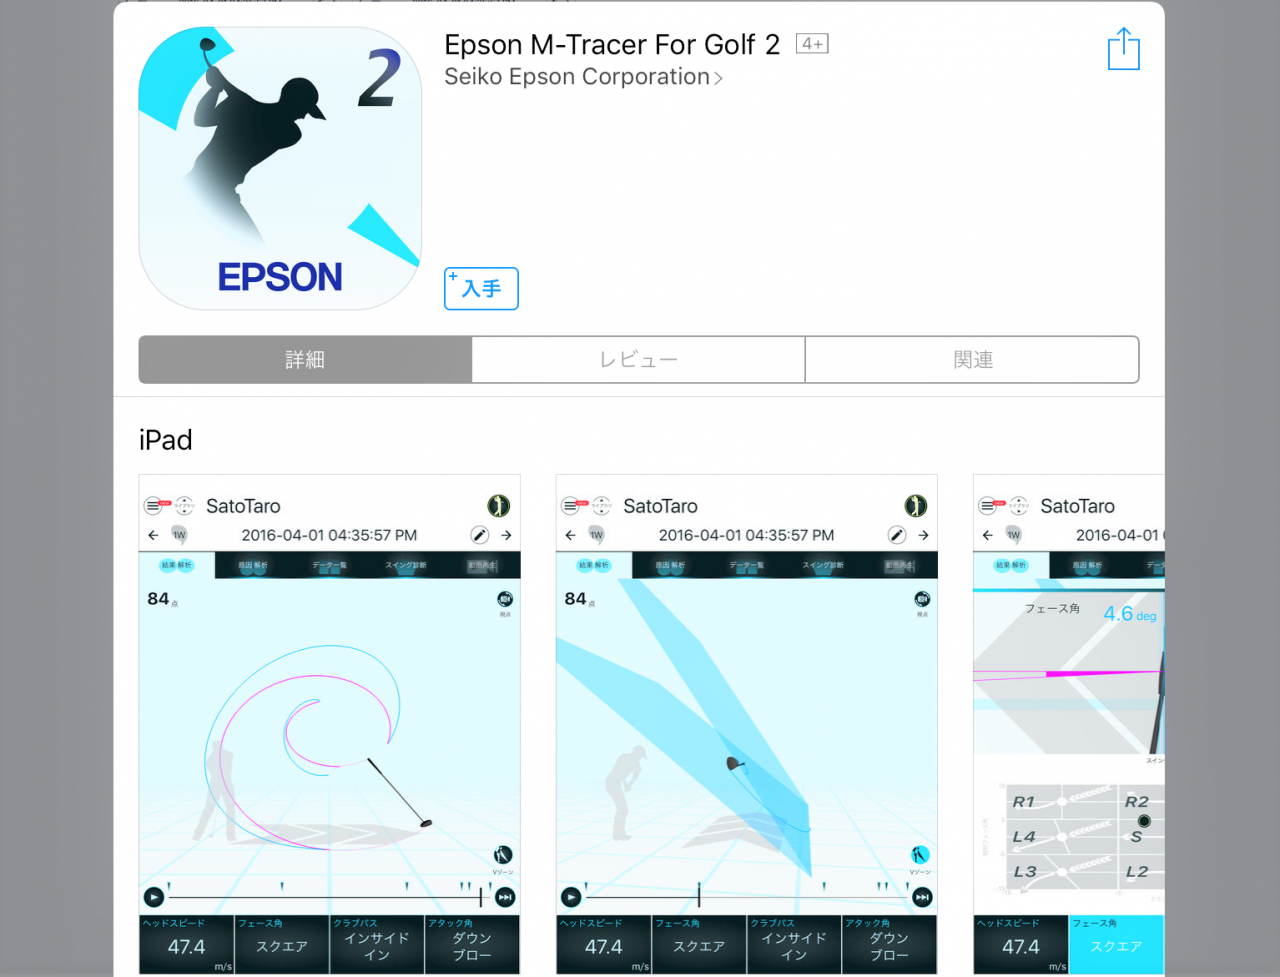 Epson M-Tracer For Golf 2